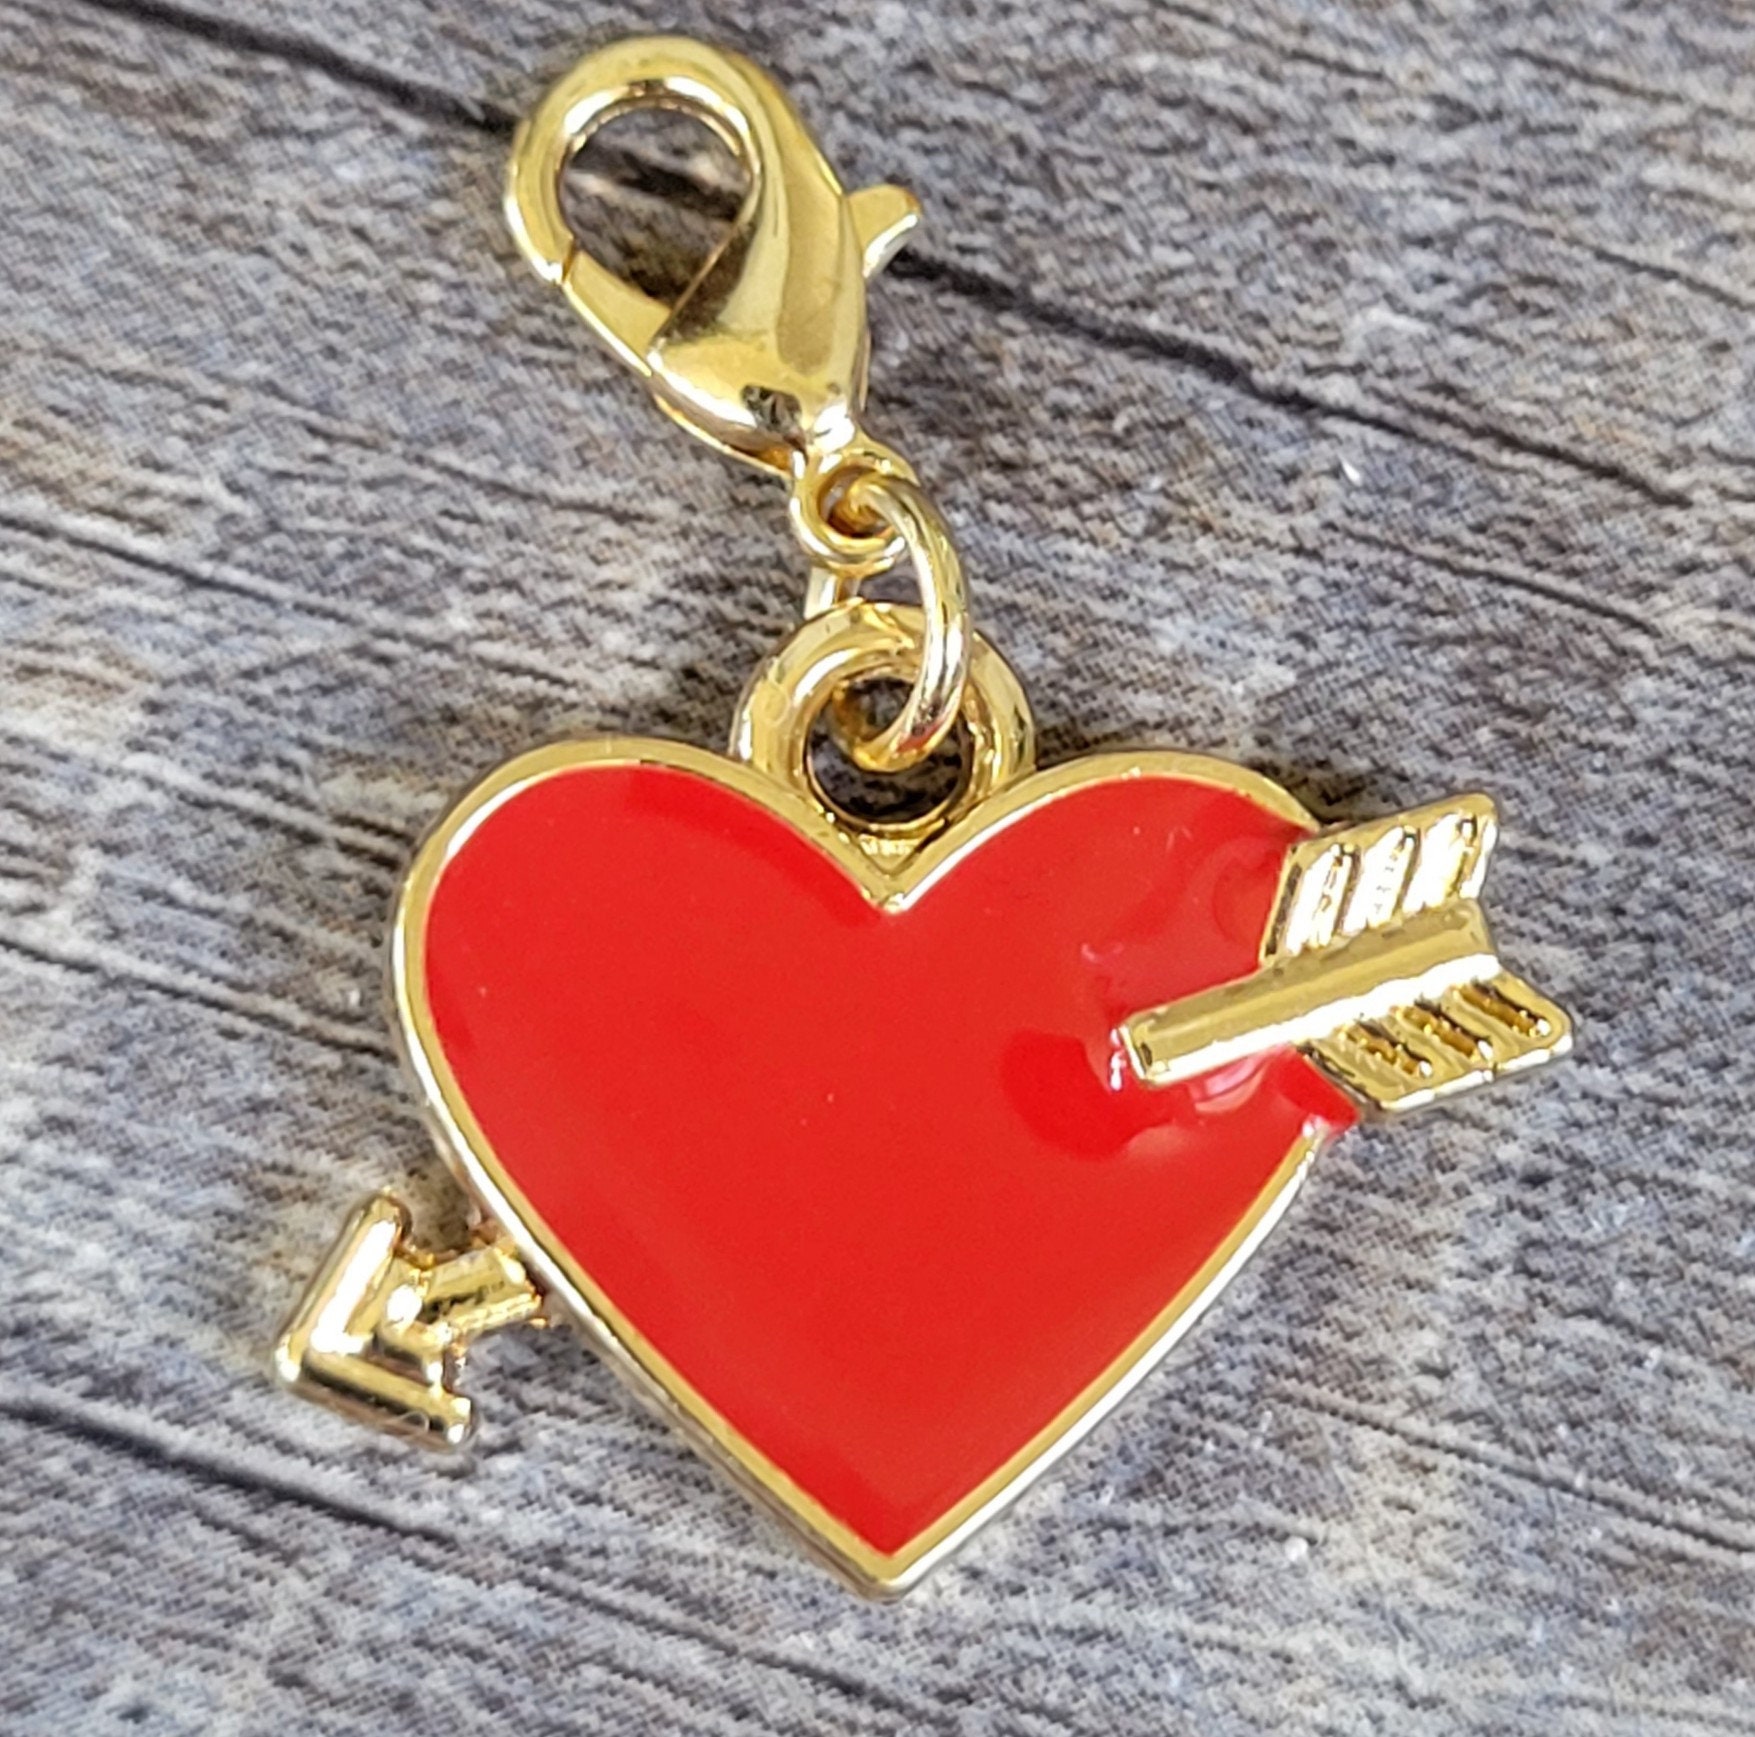 Heart Charm Necklace on Beautiful Gold Filled Chain With Swarovski Crystals  and Red Enamel Heart Charms. Delightful Magnetic Heart Clasp. 